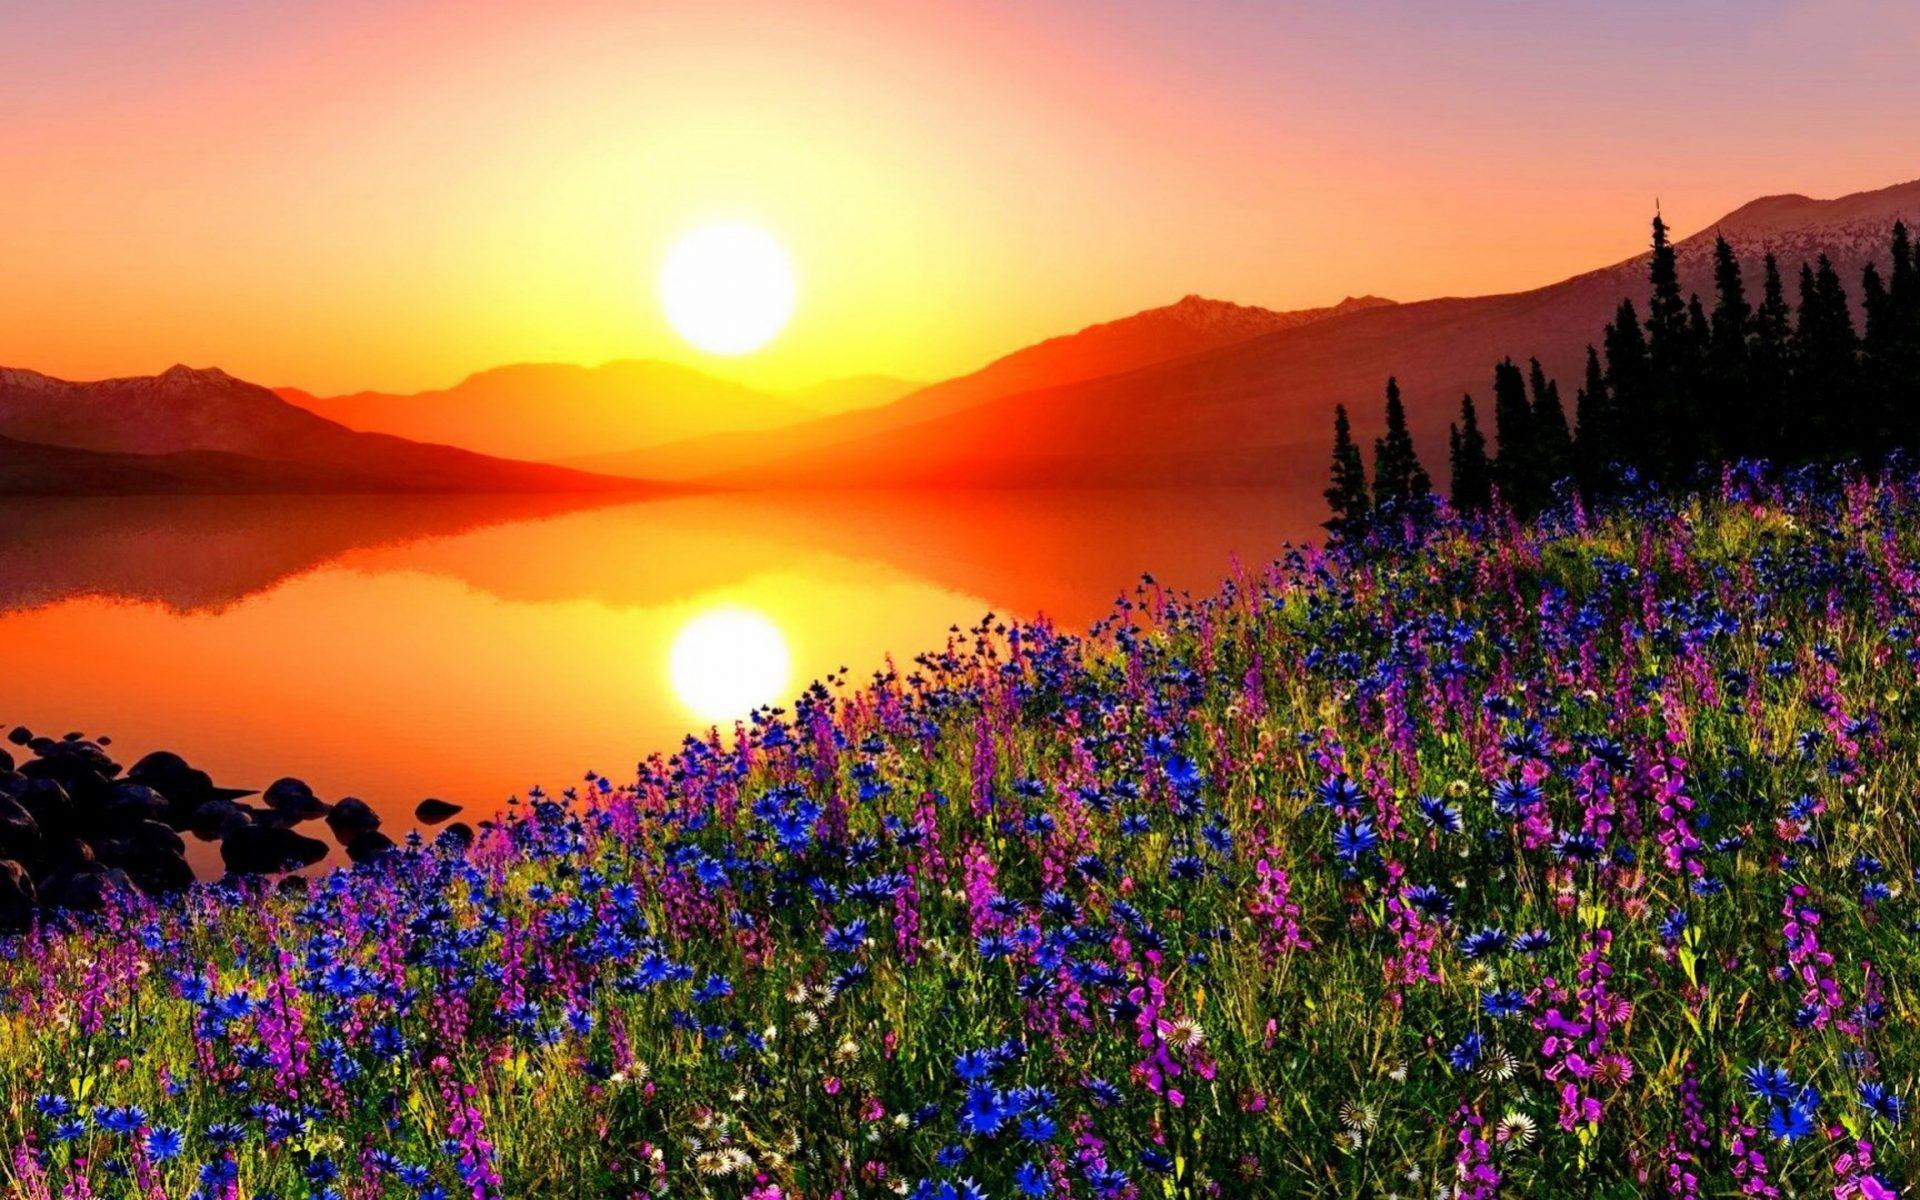 Mountain Flowers at Sunset HD Wallpaper. Background Image